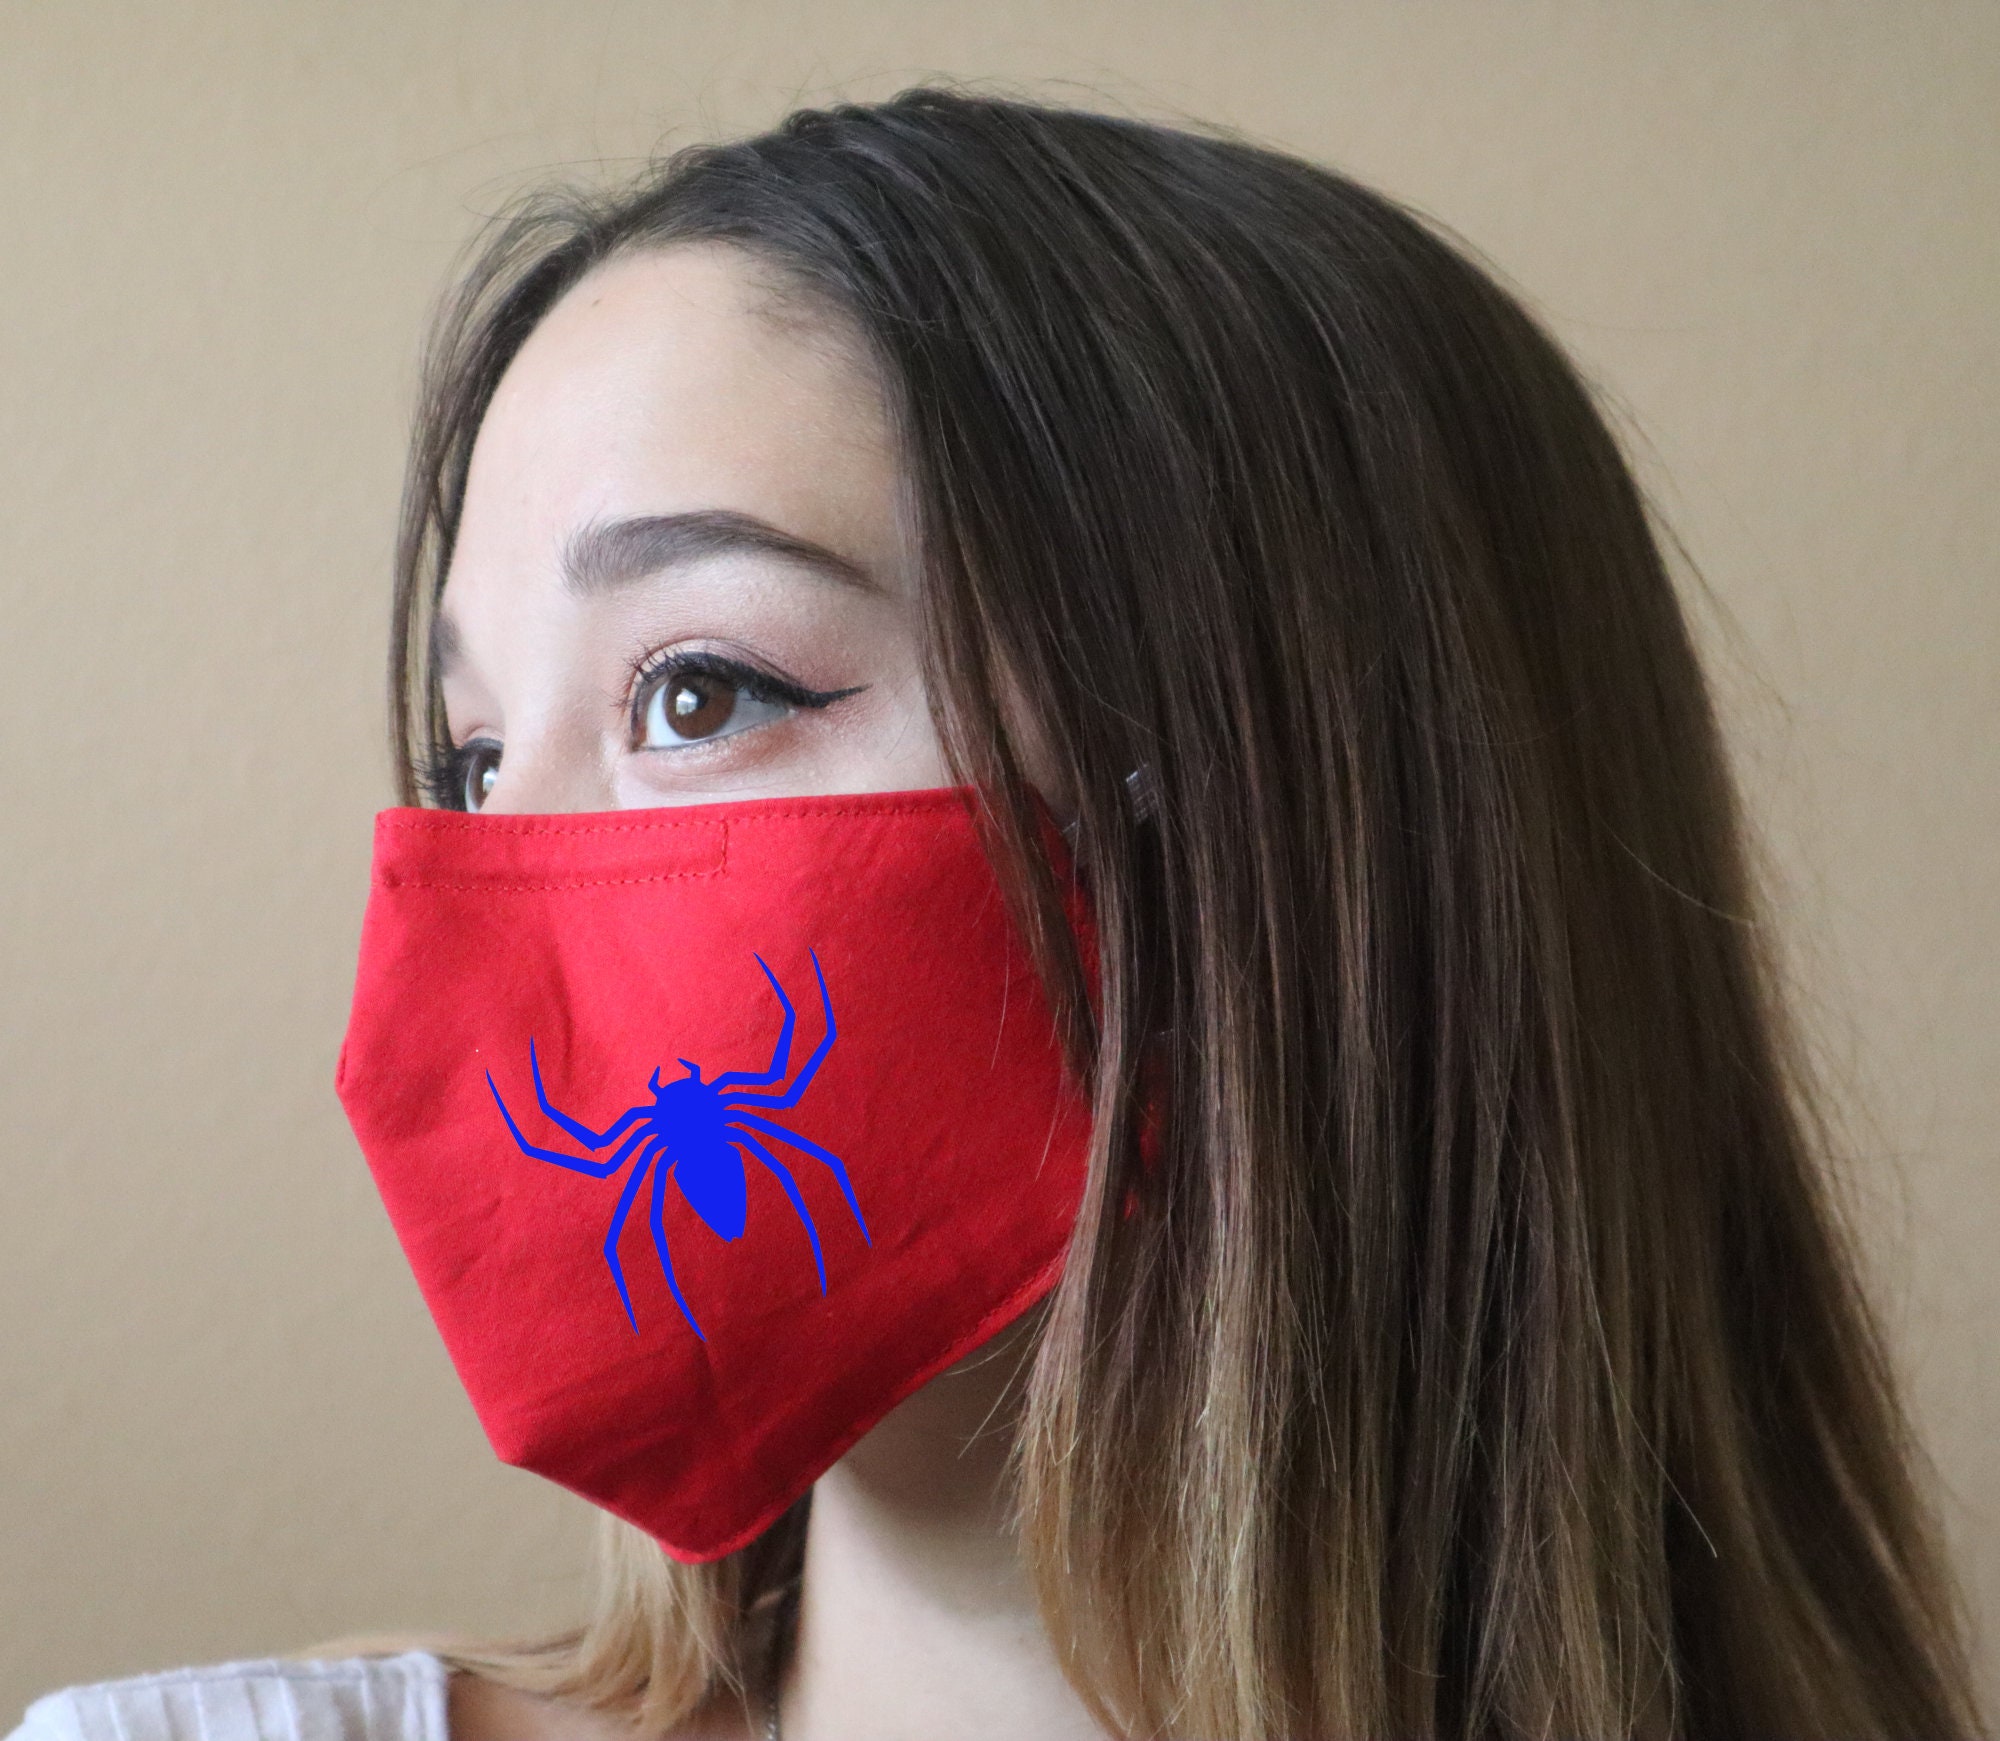 Handmade Cotton Blend Customizable Face Masks With Adjustable Ear-Loops - Super Heroes- Spider-Man Adult Large 10 X 6.5"